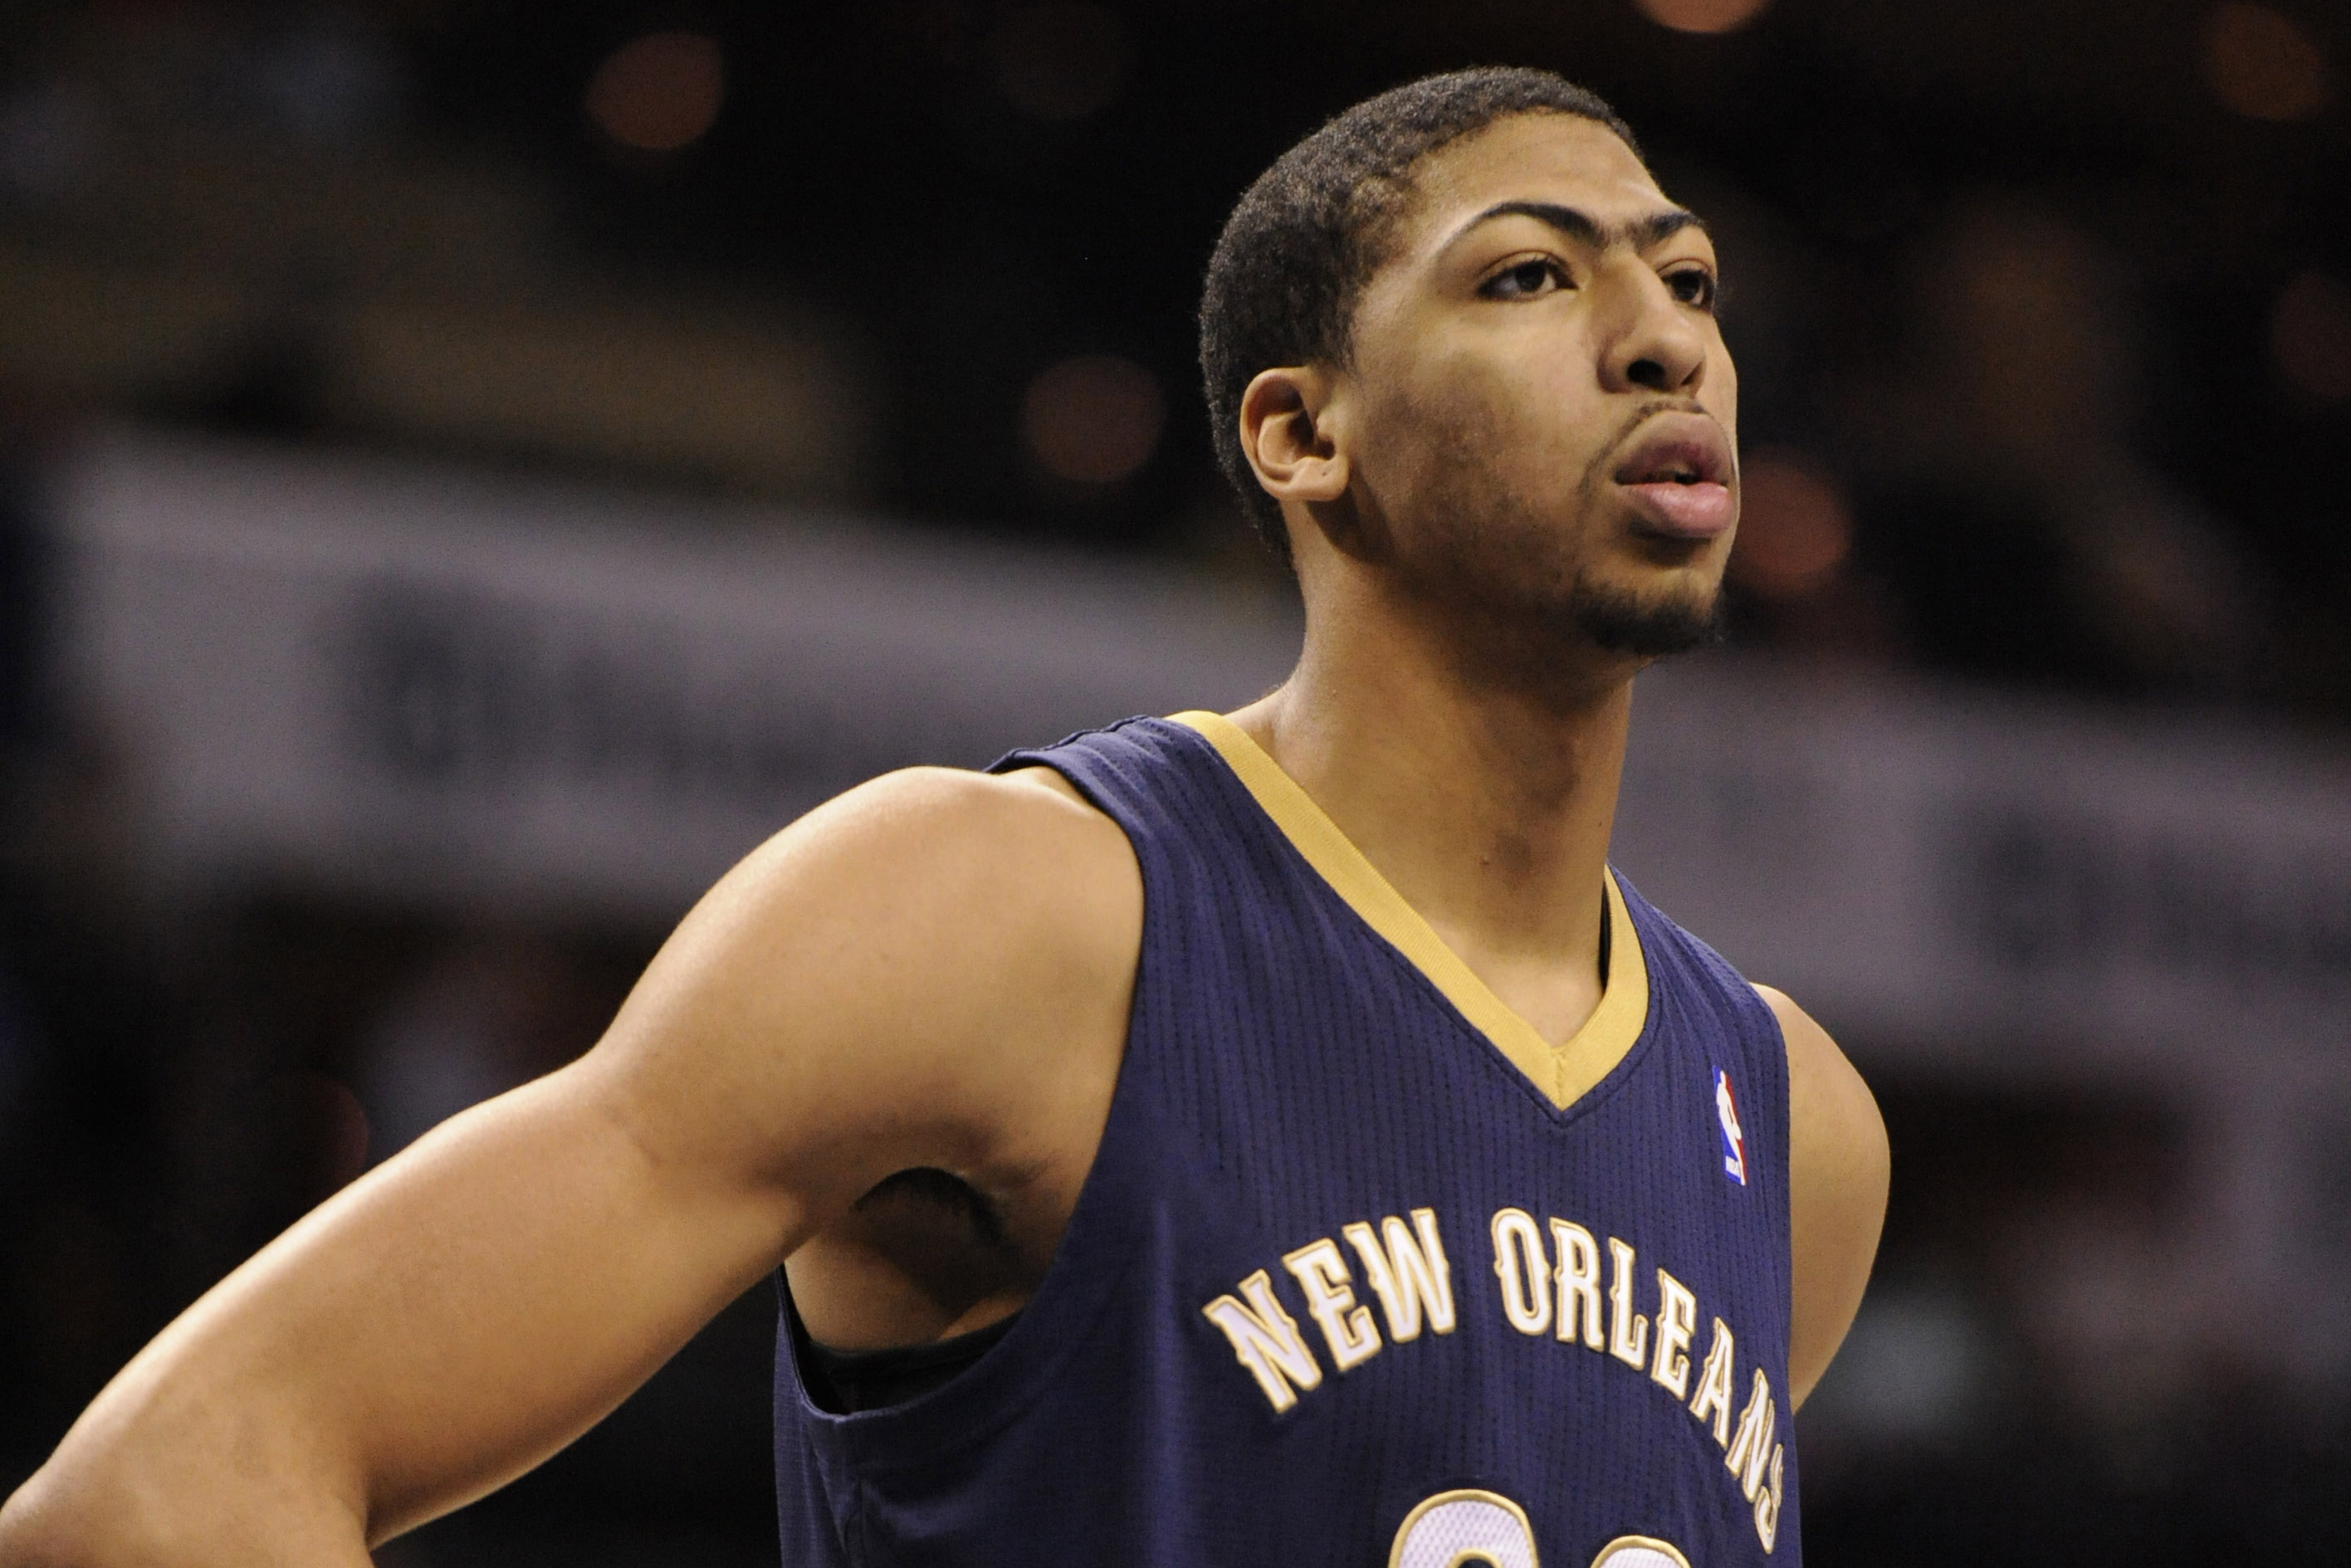 Anthony Davis: College basketball stats, best moments, quotes